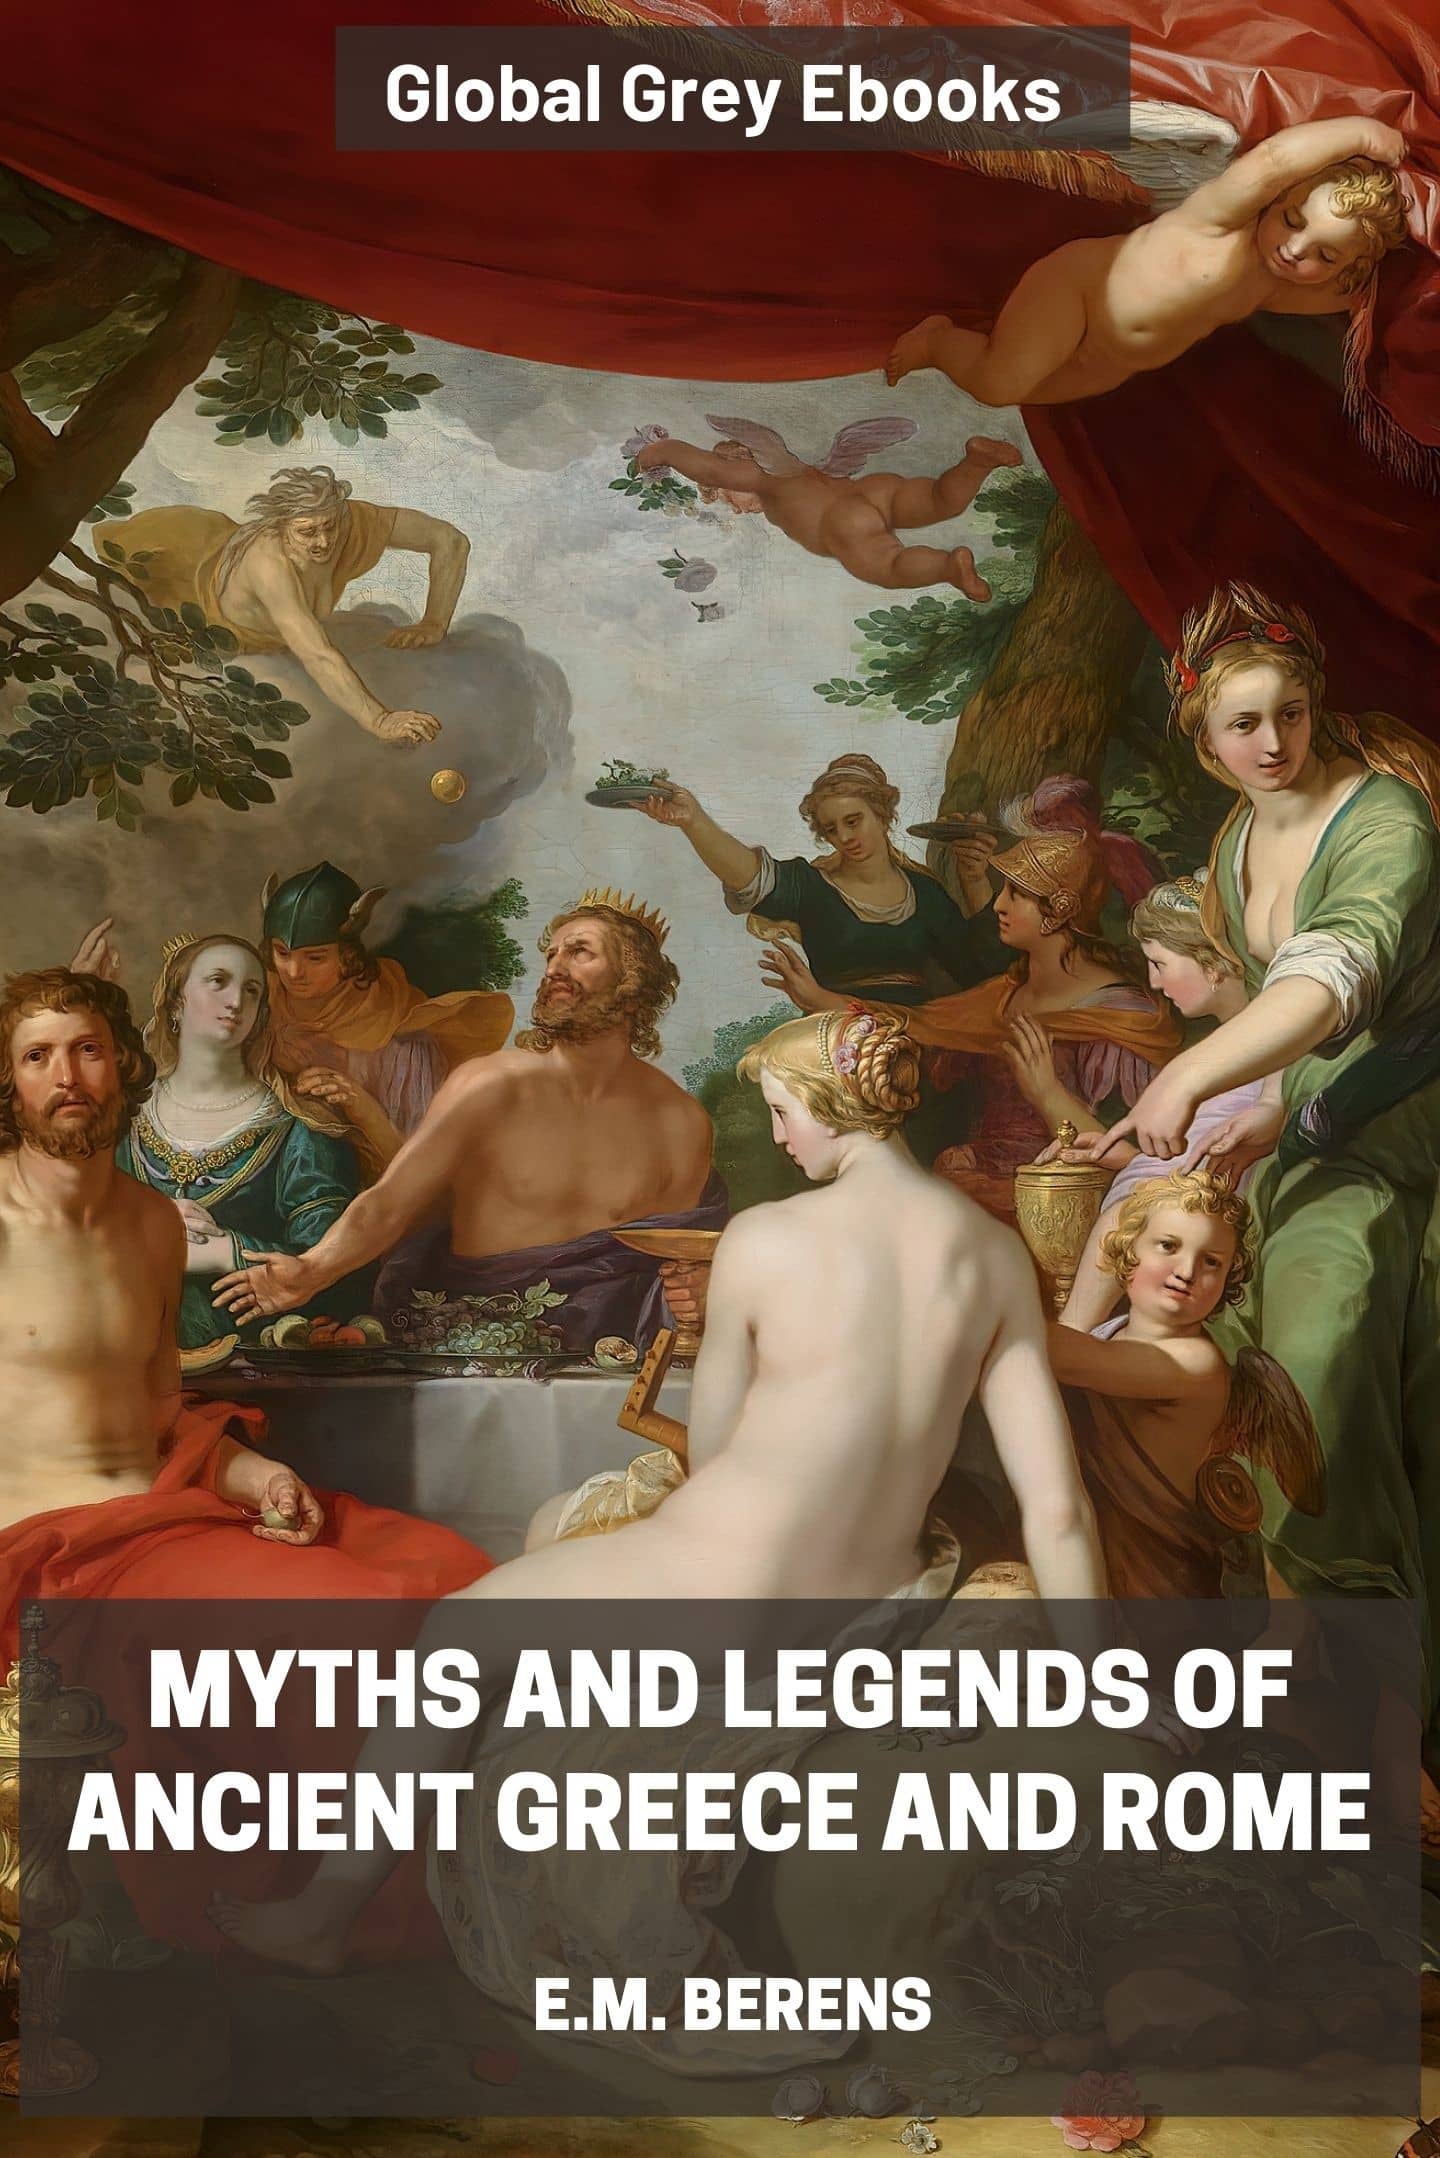 Myths of Greece and Rome, narrated with special reference to literature and  art